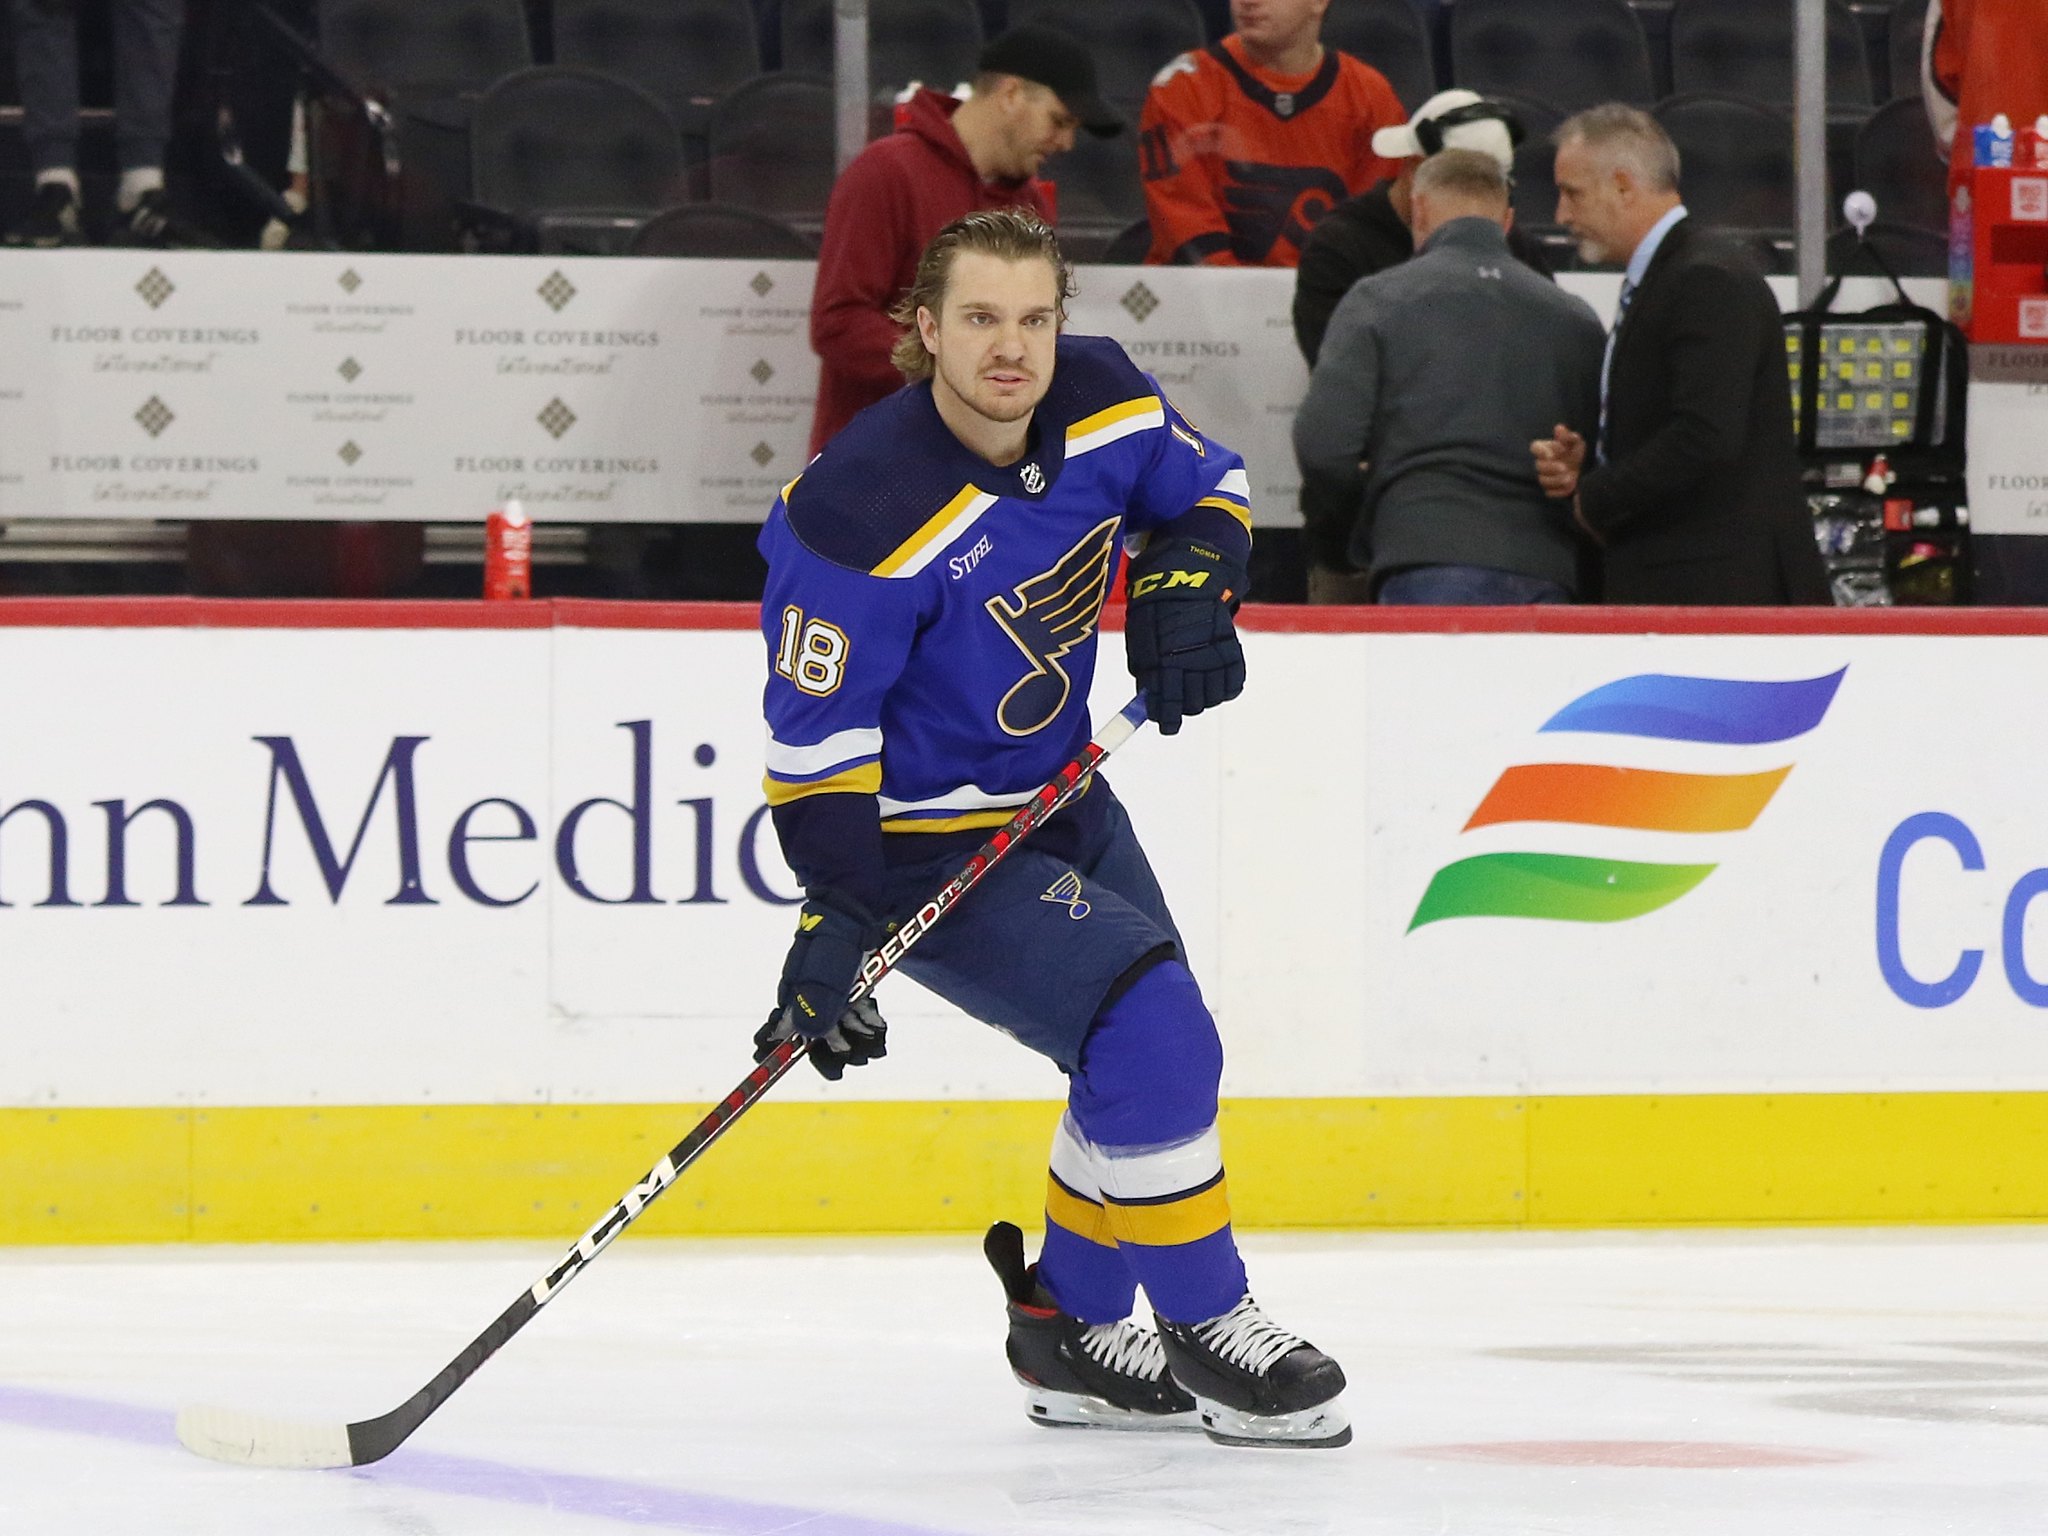 Roster and lineup starting to crystallize for Blues